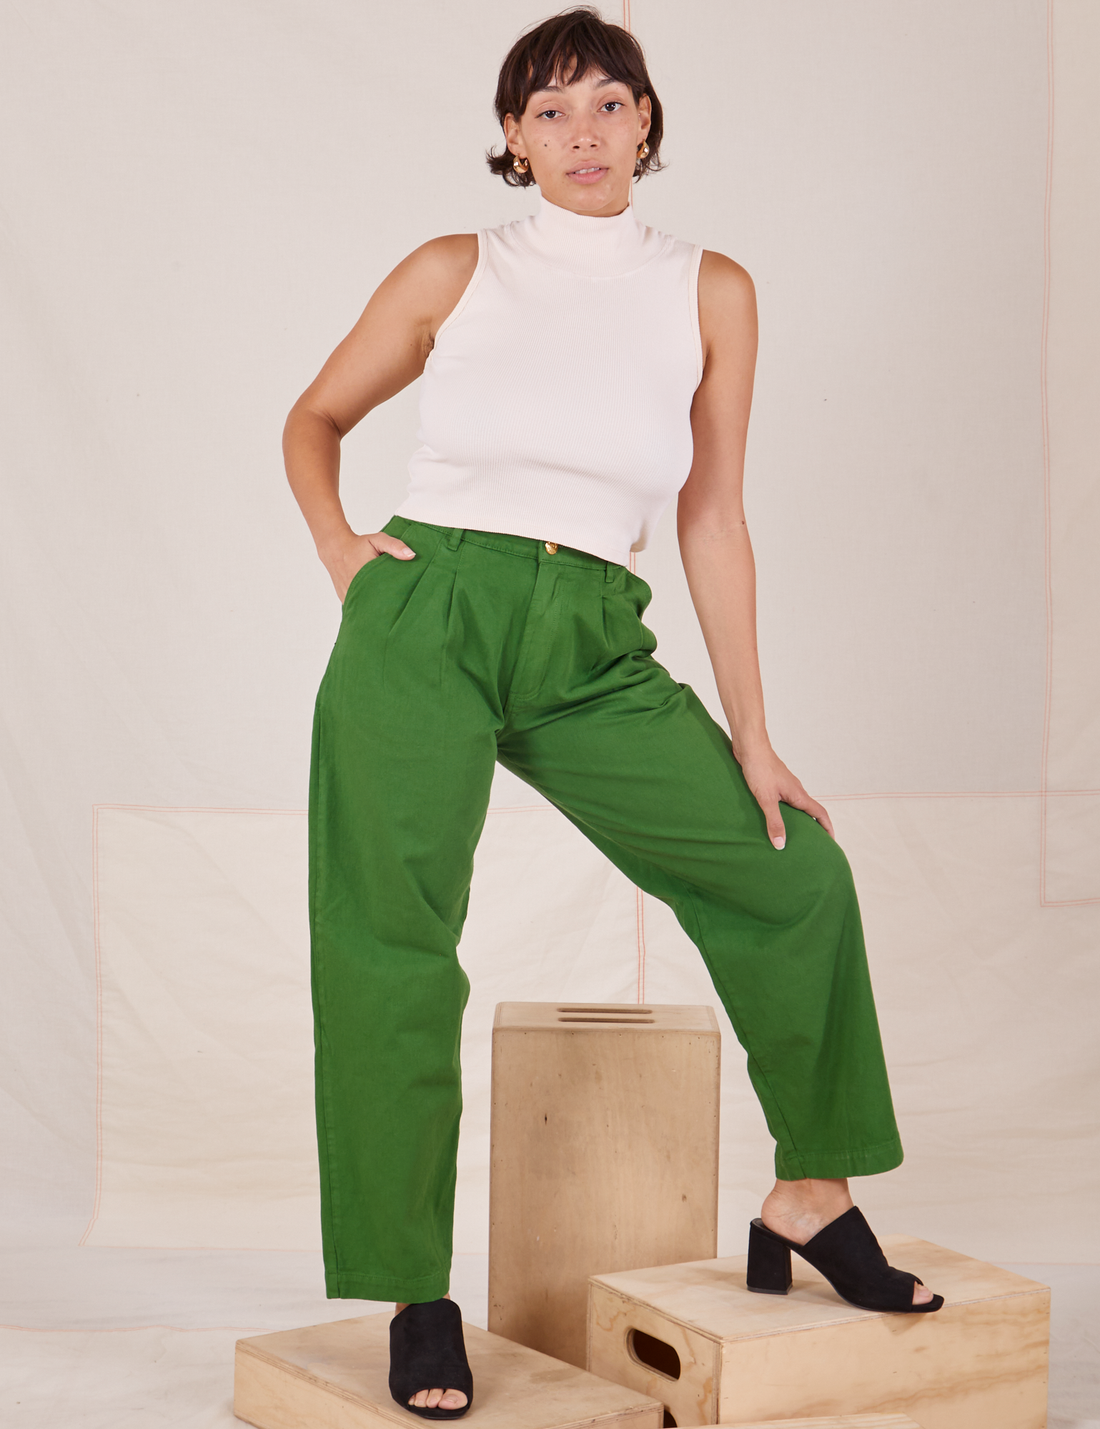 Tiara is 5'4" and wearing S Heavyweight Trousers in Lawn Green paired with vintage off-white Sleeveless Turtleneck